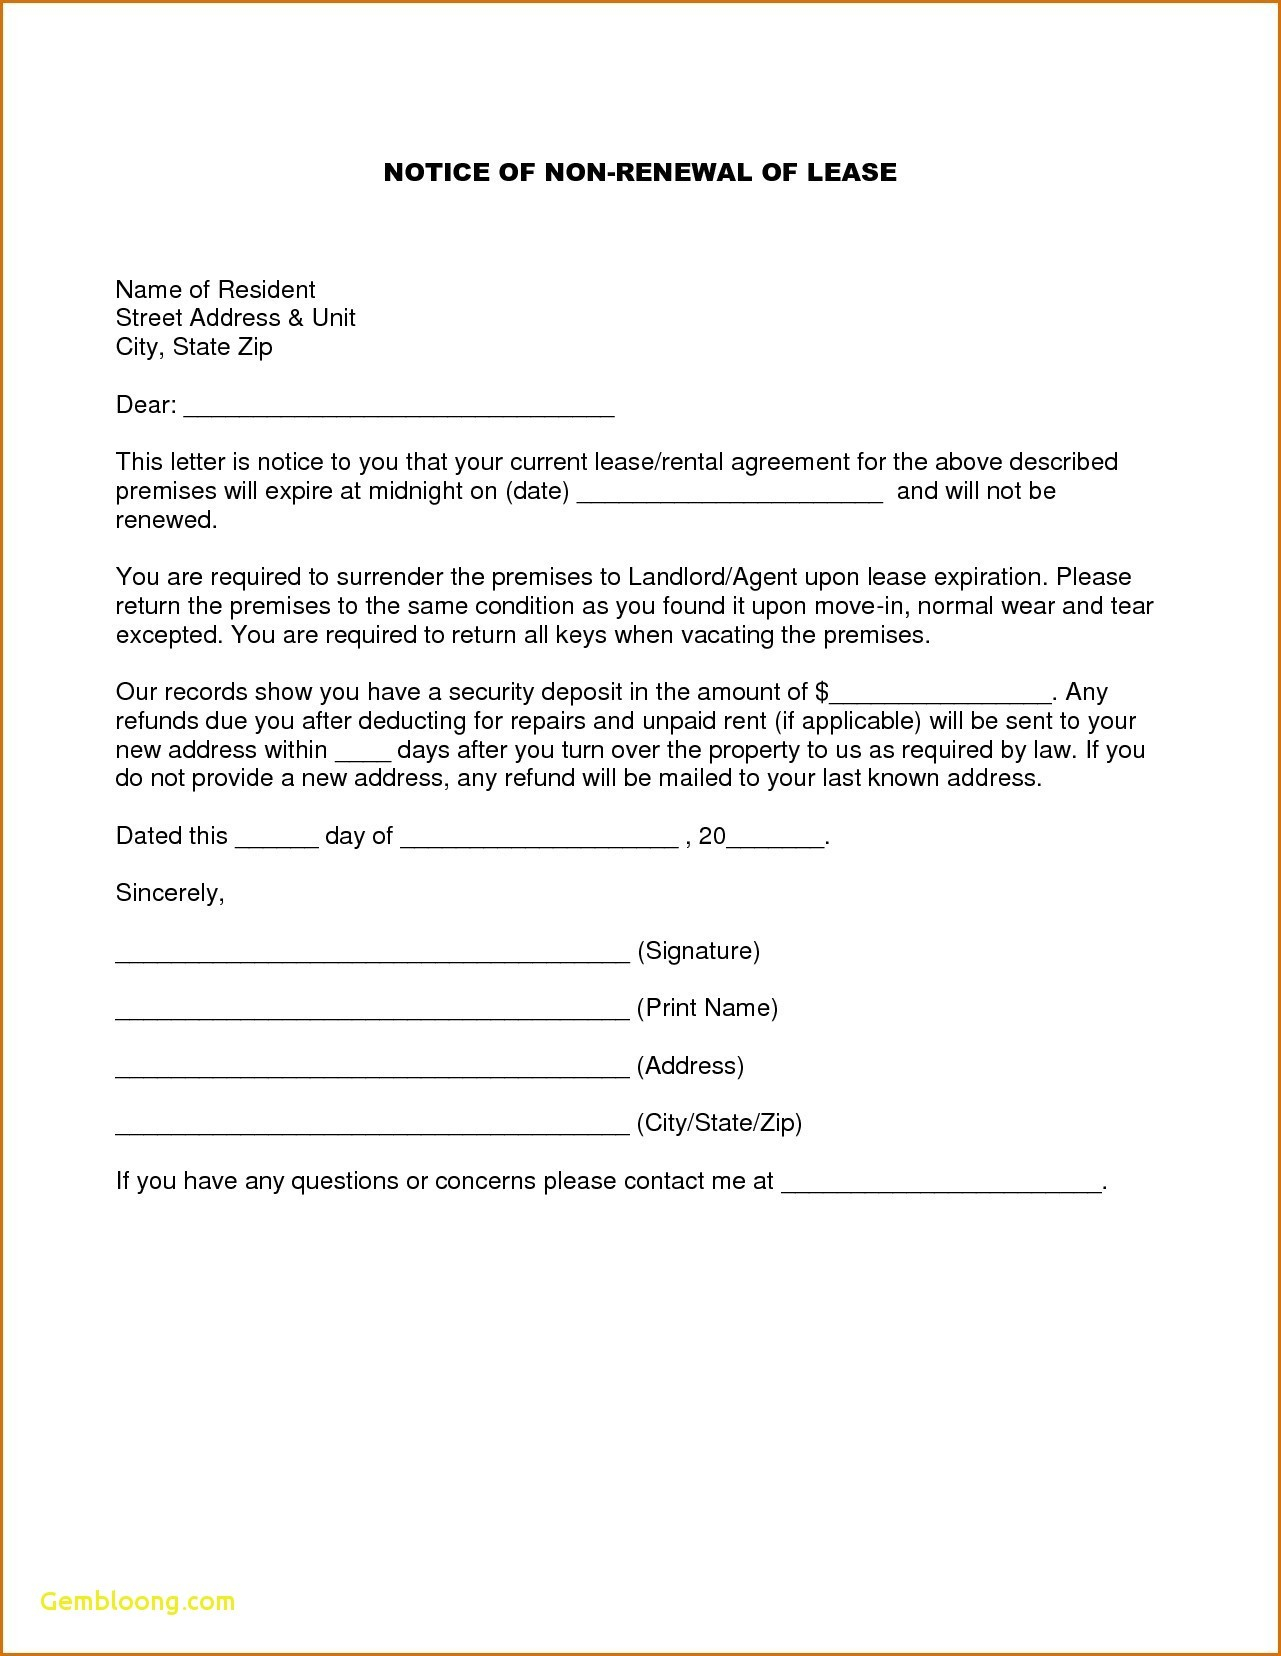 Not Renewing Lease Letter Template Samples | Letter ...